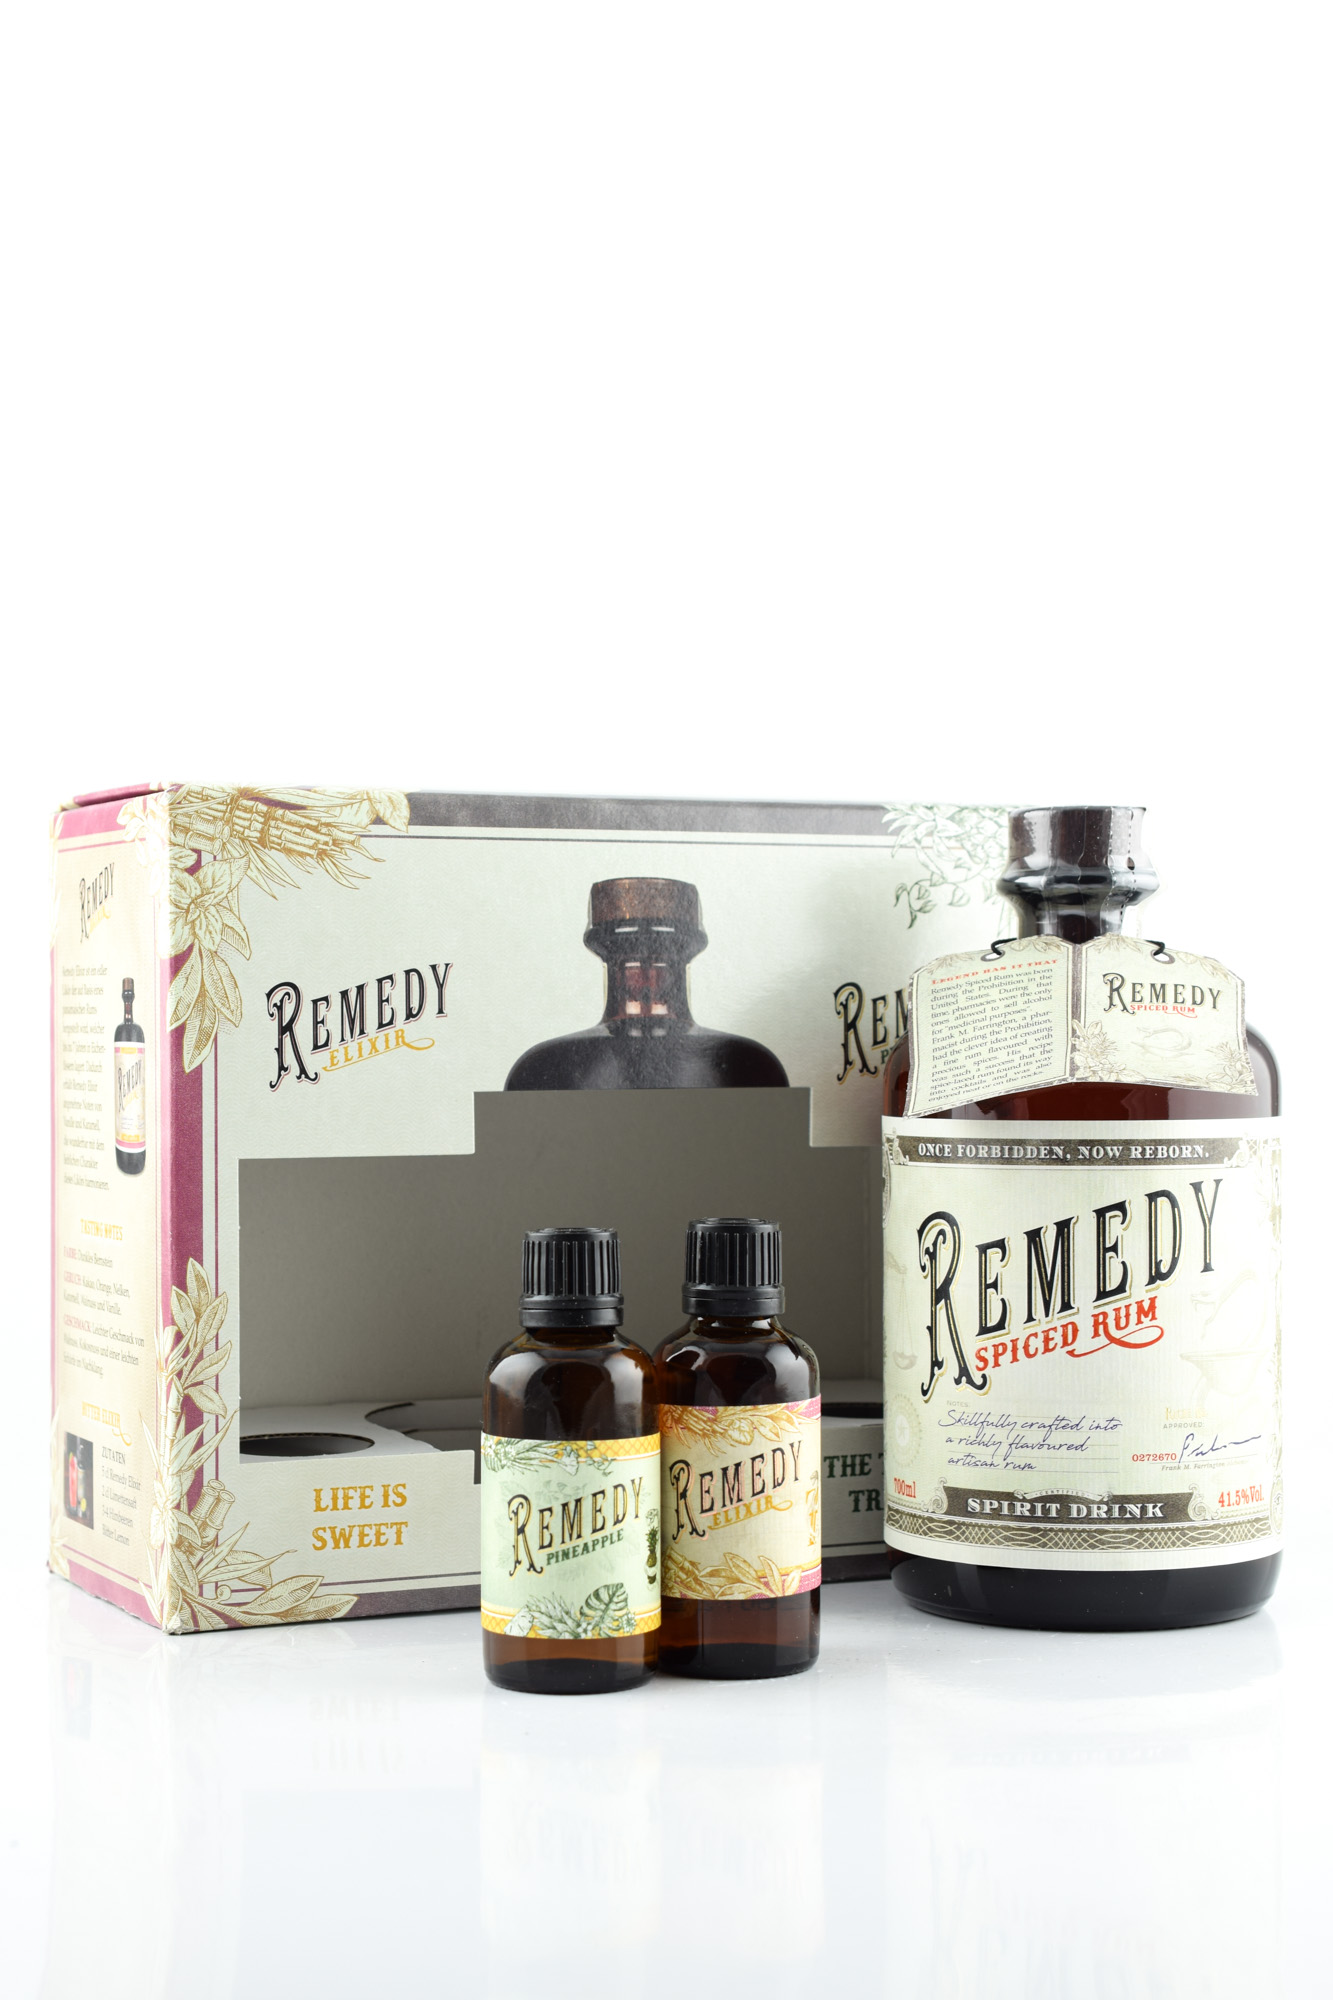 Remedy Spiced Rum at Home of Malts >> explore now! | Home of Malts